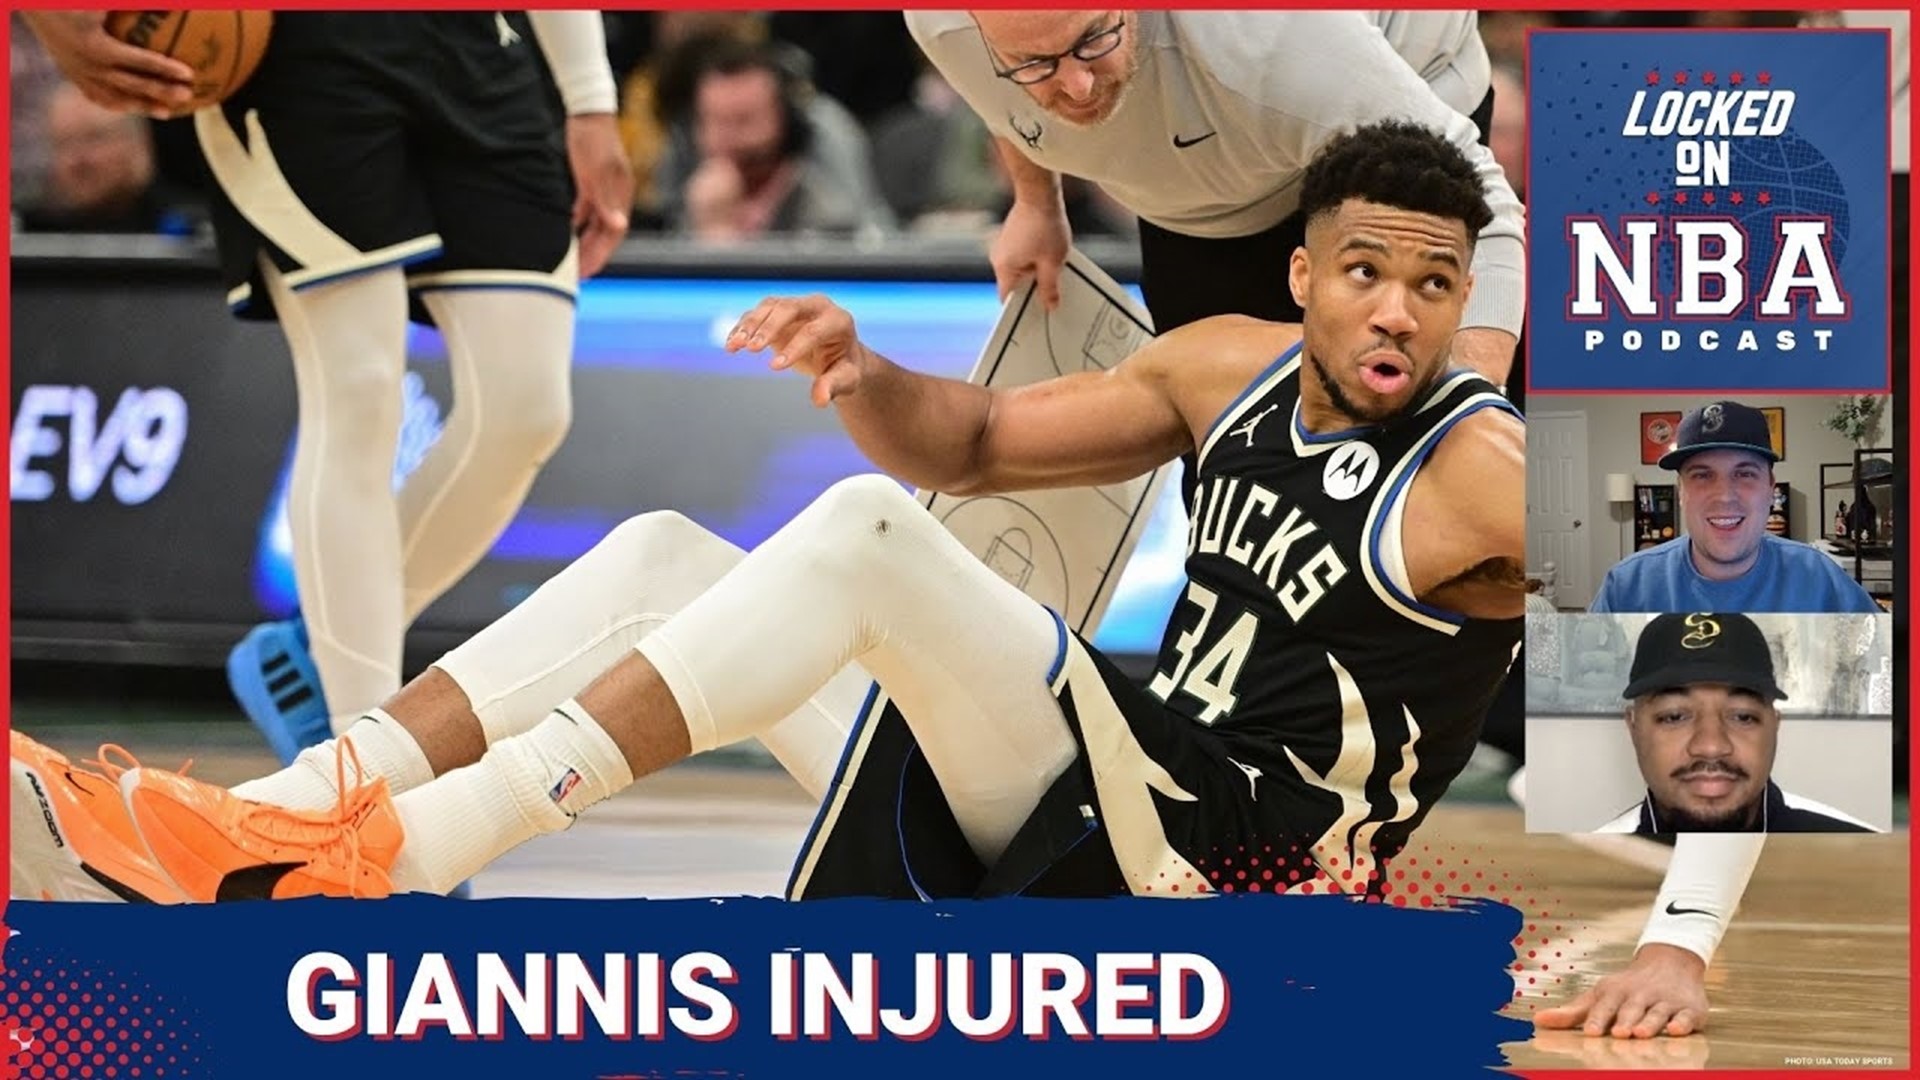 The Milwaukee Bucks took down the Boston Celtics on Tuesday, but the story of the game was Giannis Antetokounmpo's injury. What does it mean for the Bucks?